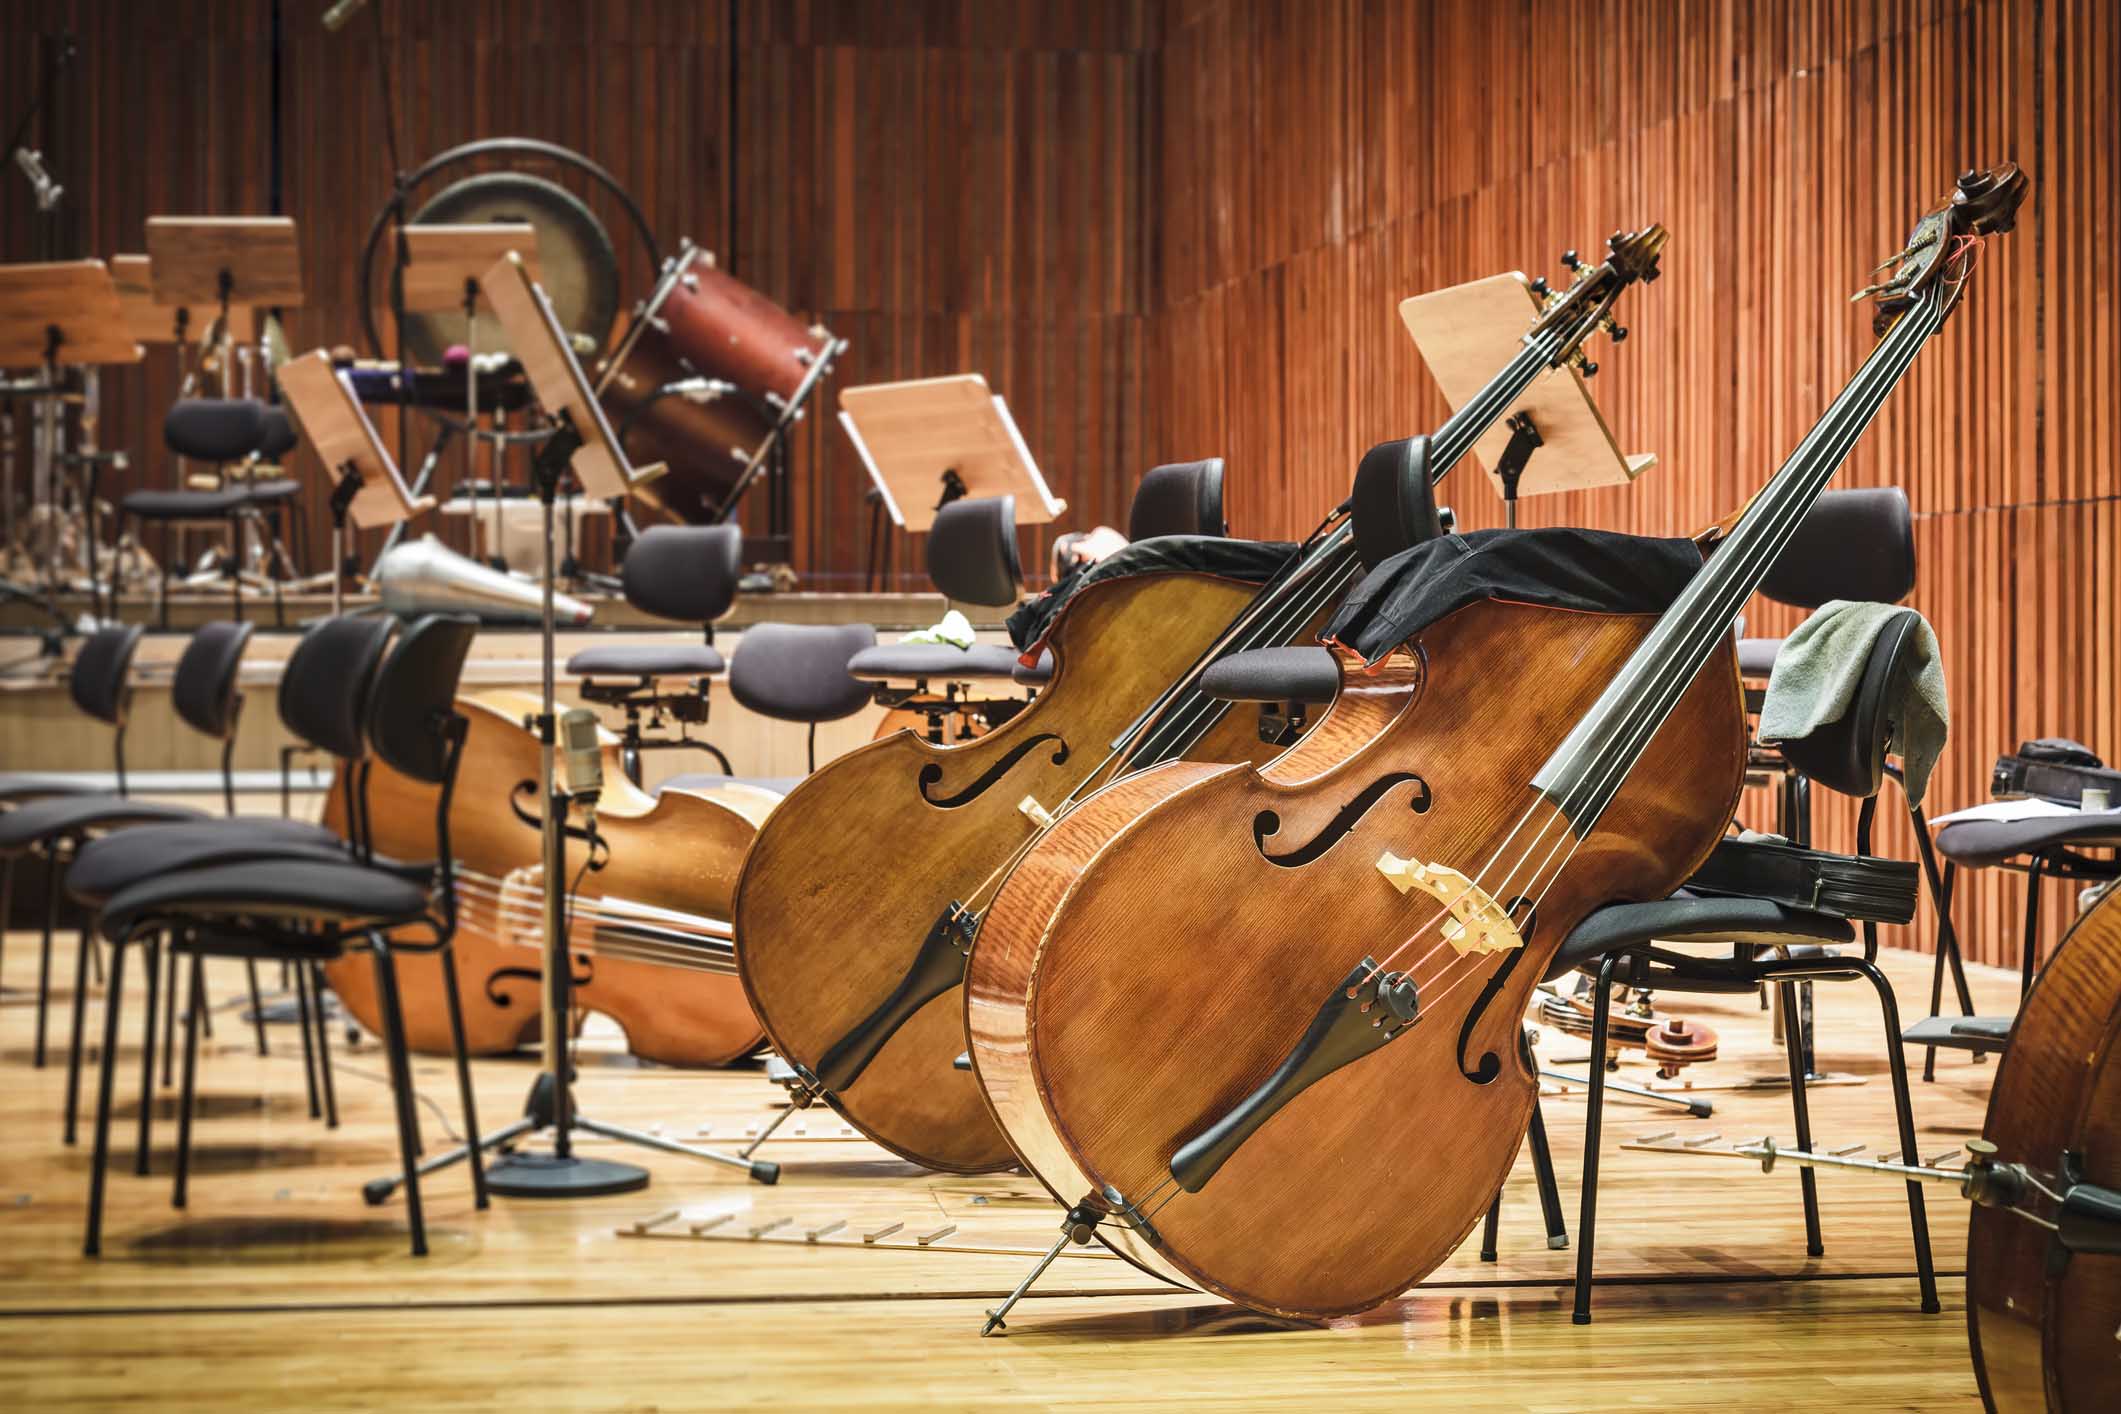 Are Your Operations a Symphony or a Cacophony?